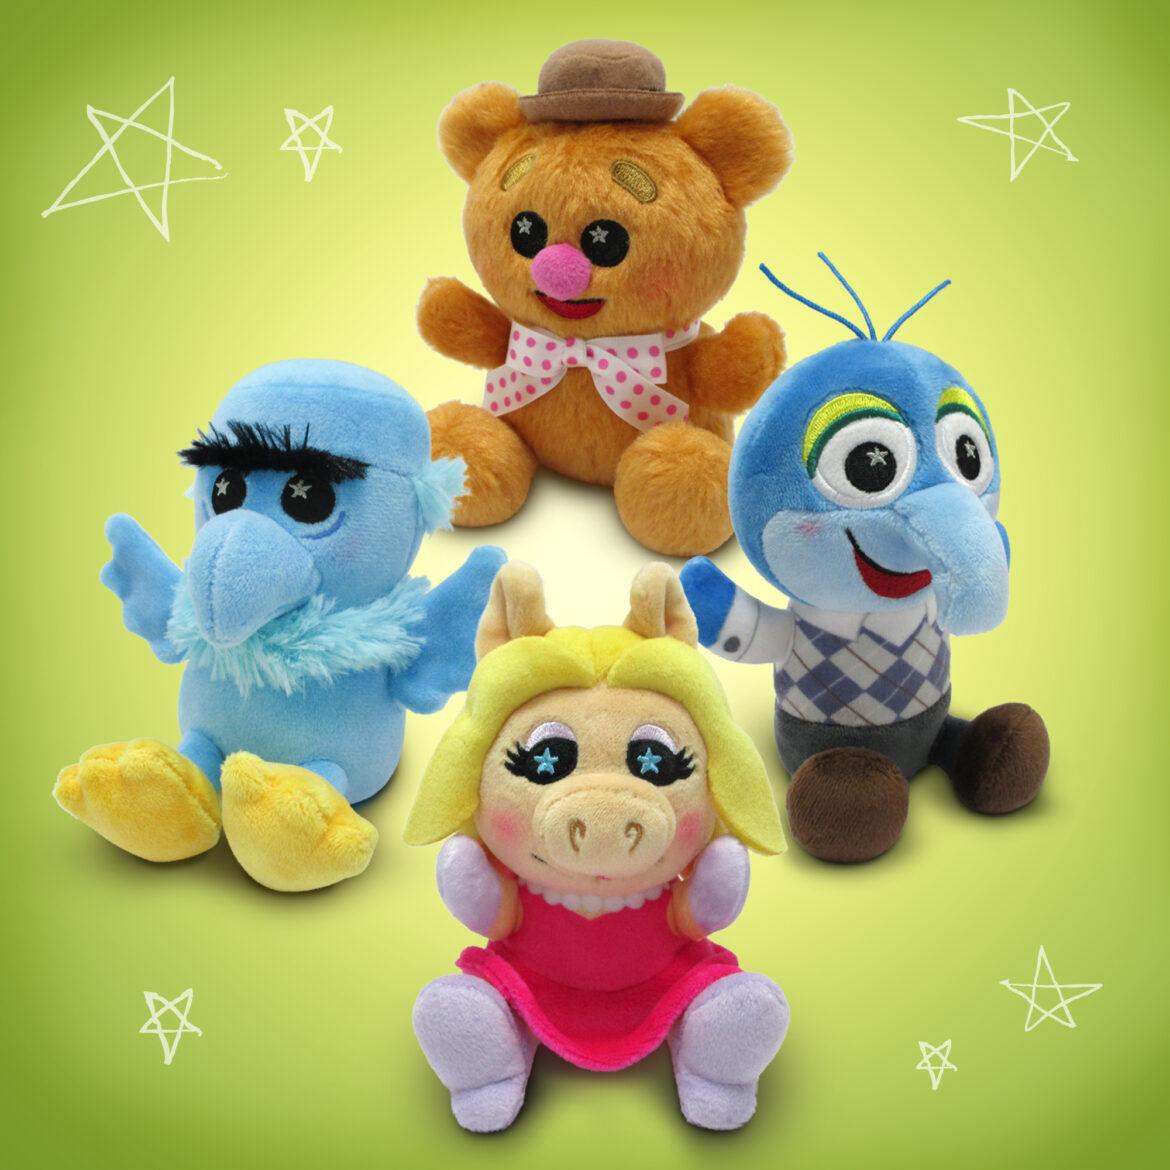 Muppet Vision 3D Wishables coming up Shop Disney on March 2nd